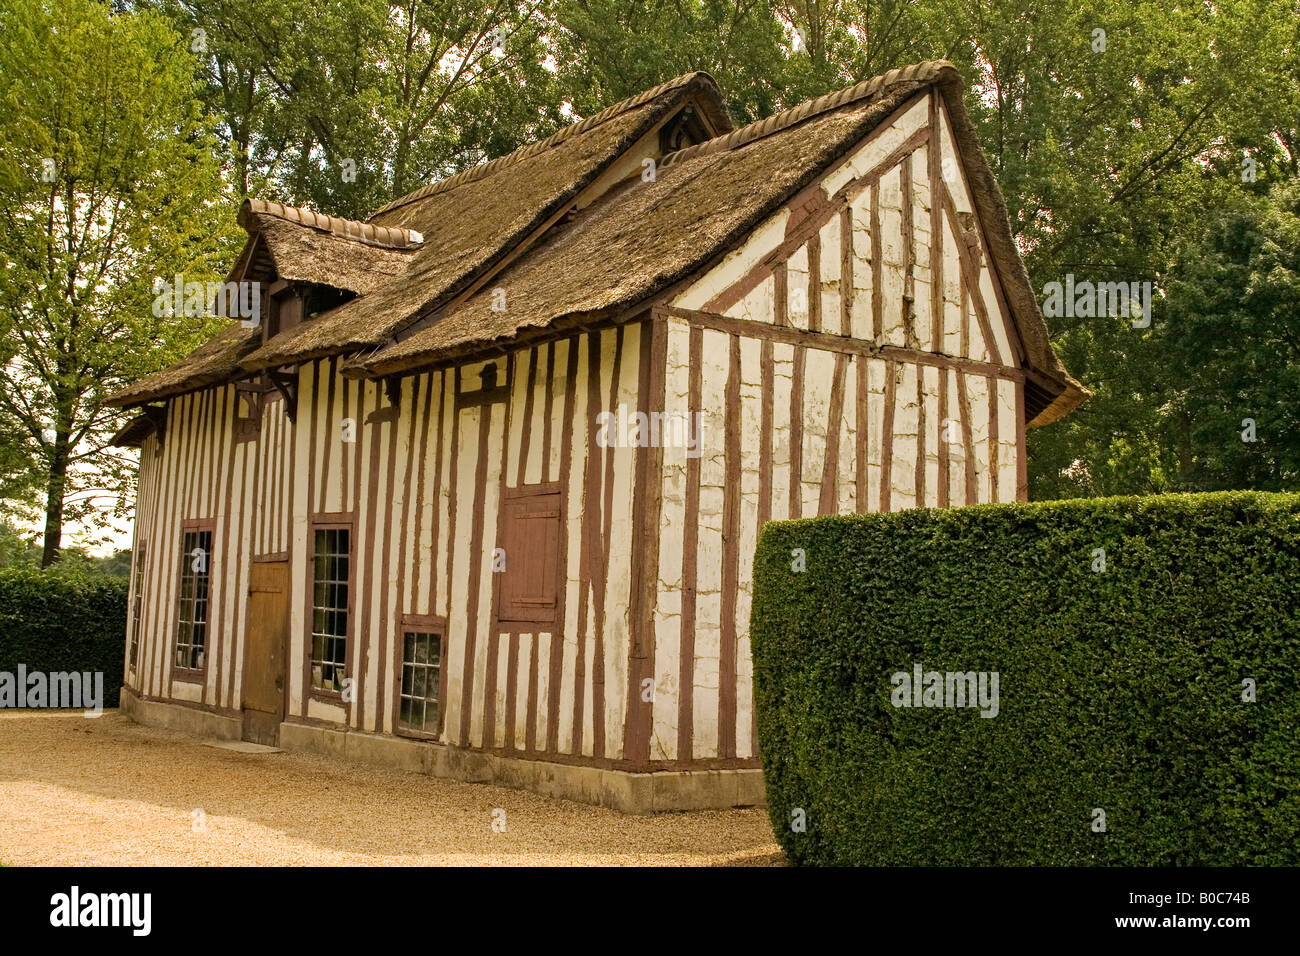 Historic House in the grounds of Chateau Chantilly, Chantilly, Picardie, France Stock Photo